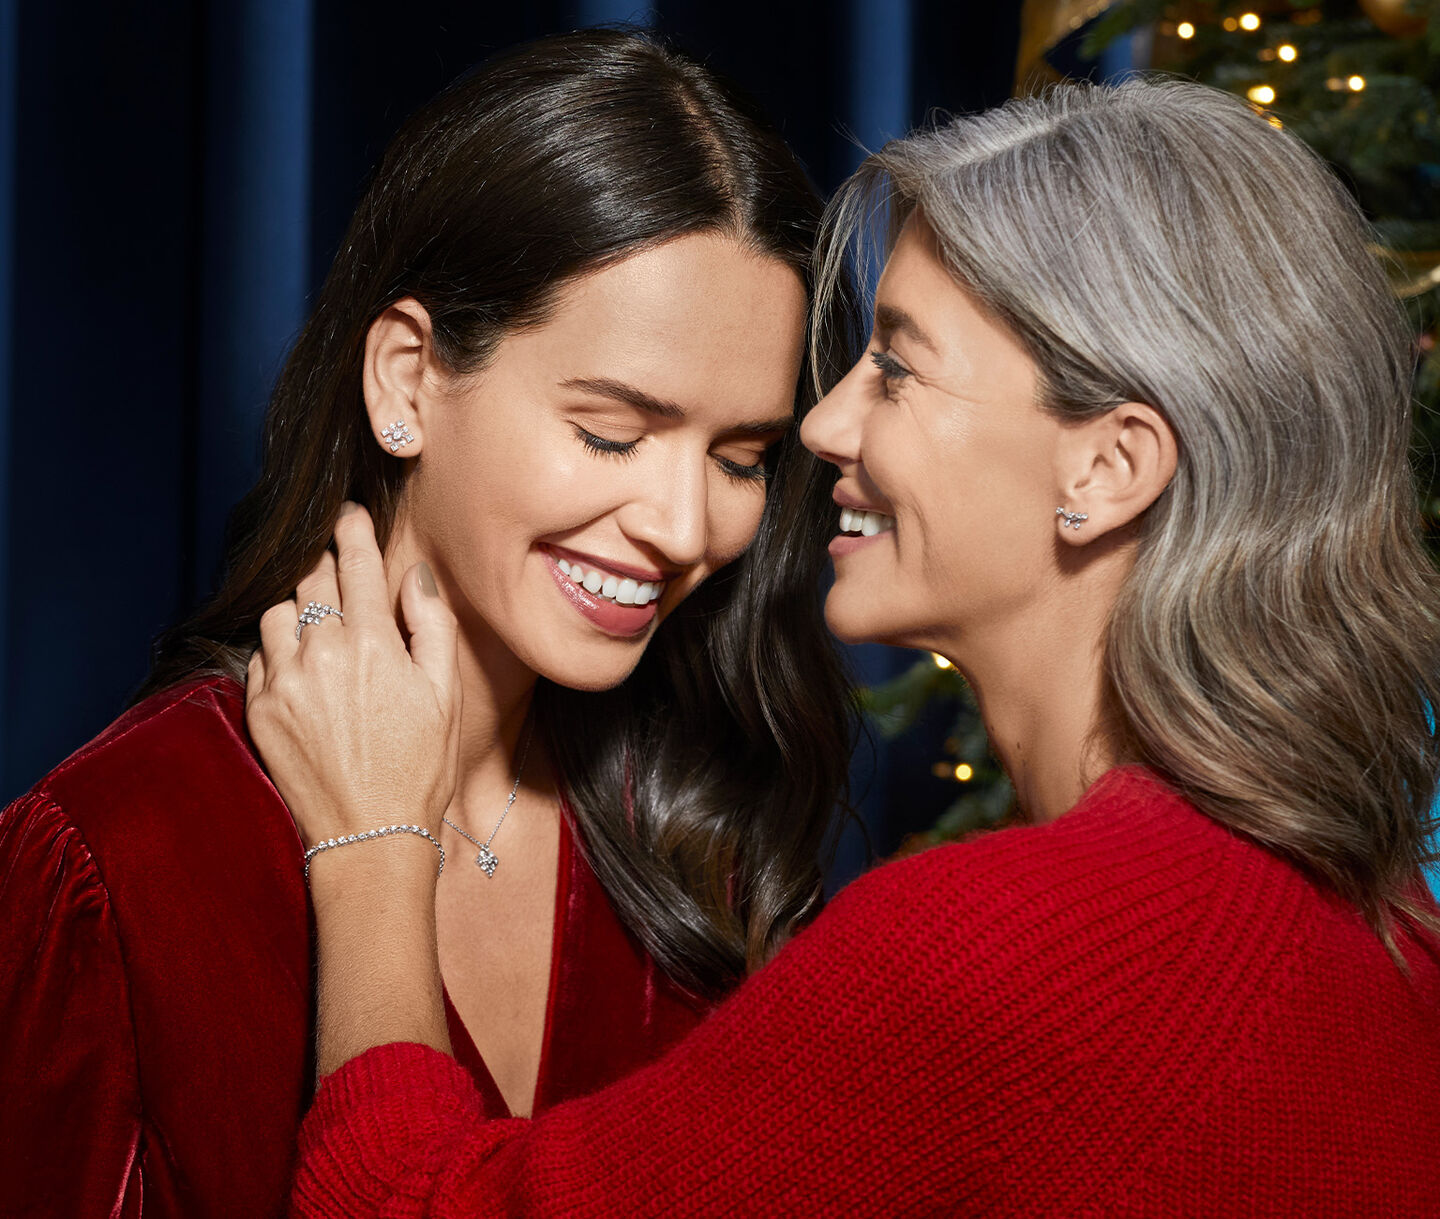 A mother and daughter embrace wearing matching snowflake jewellery.